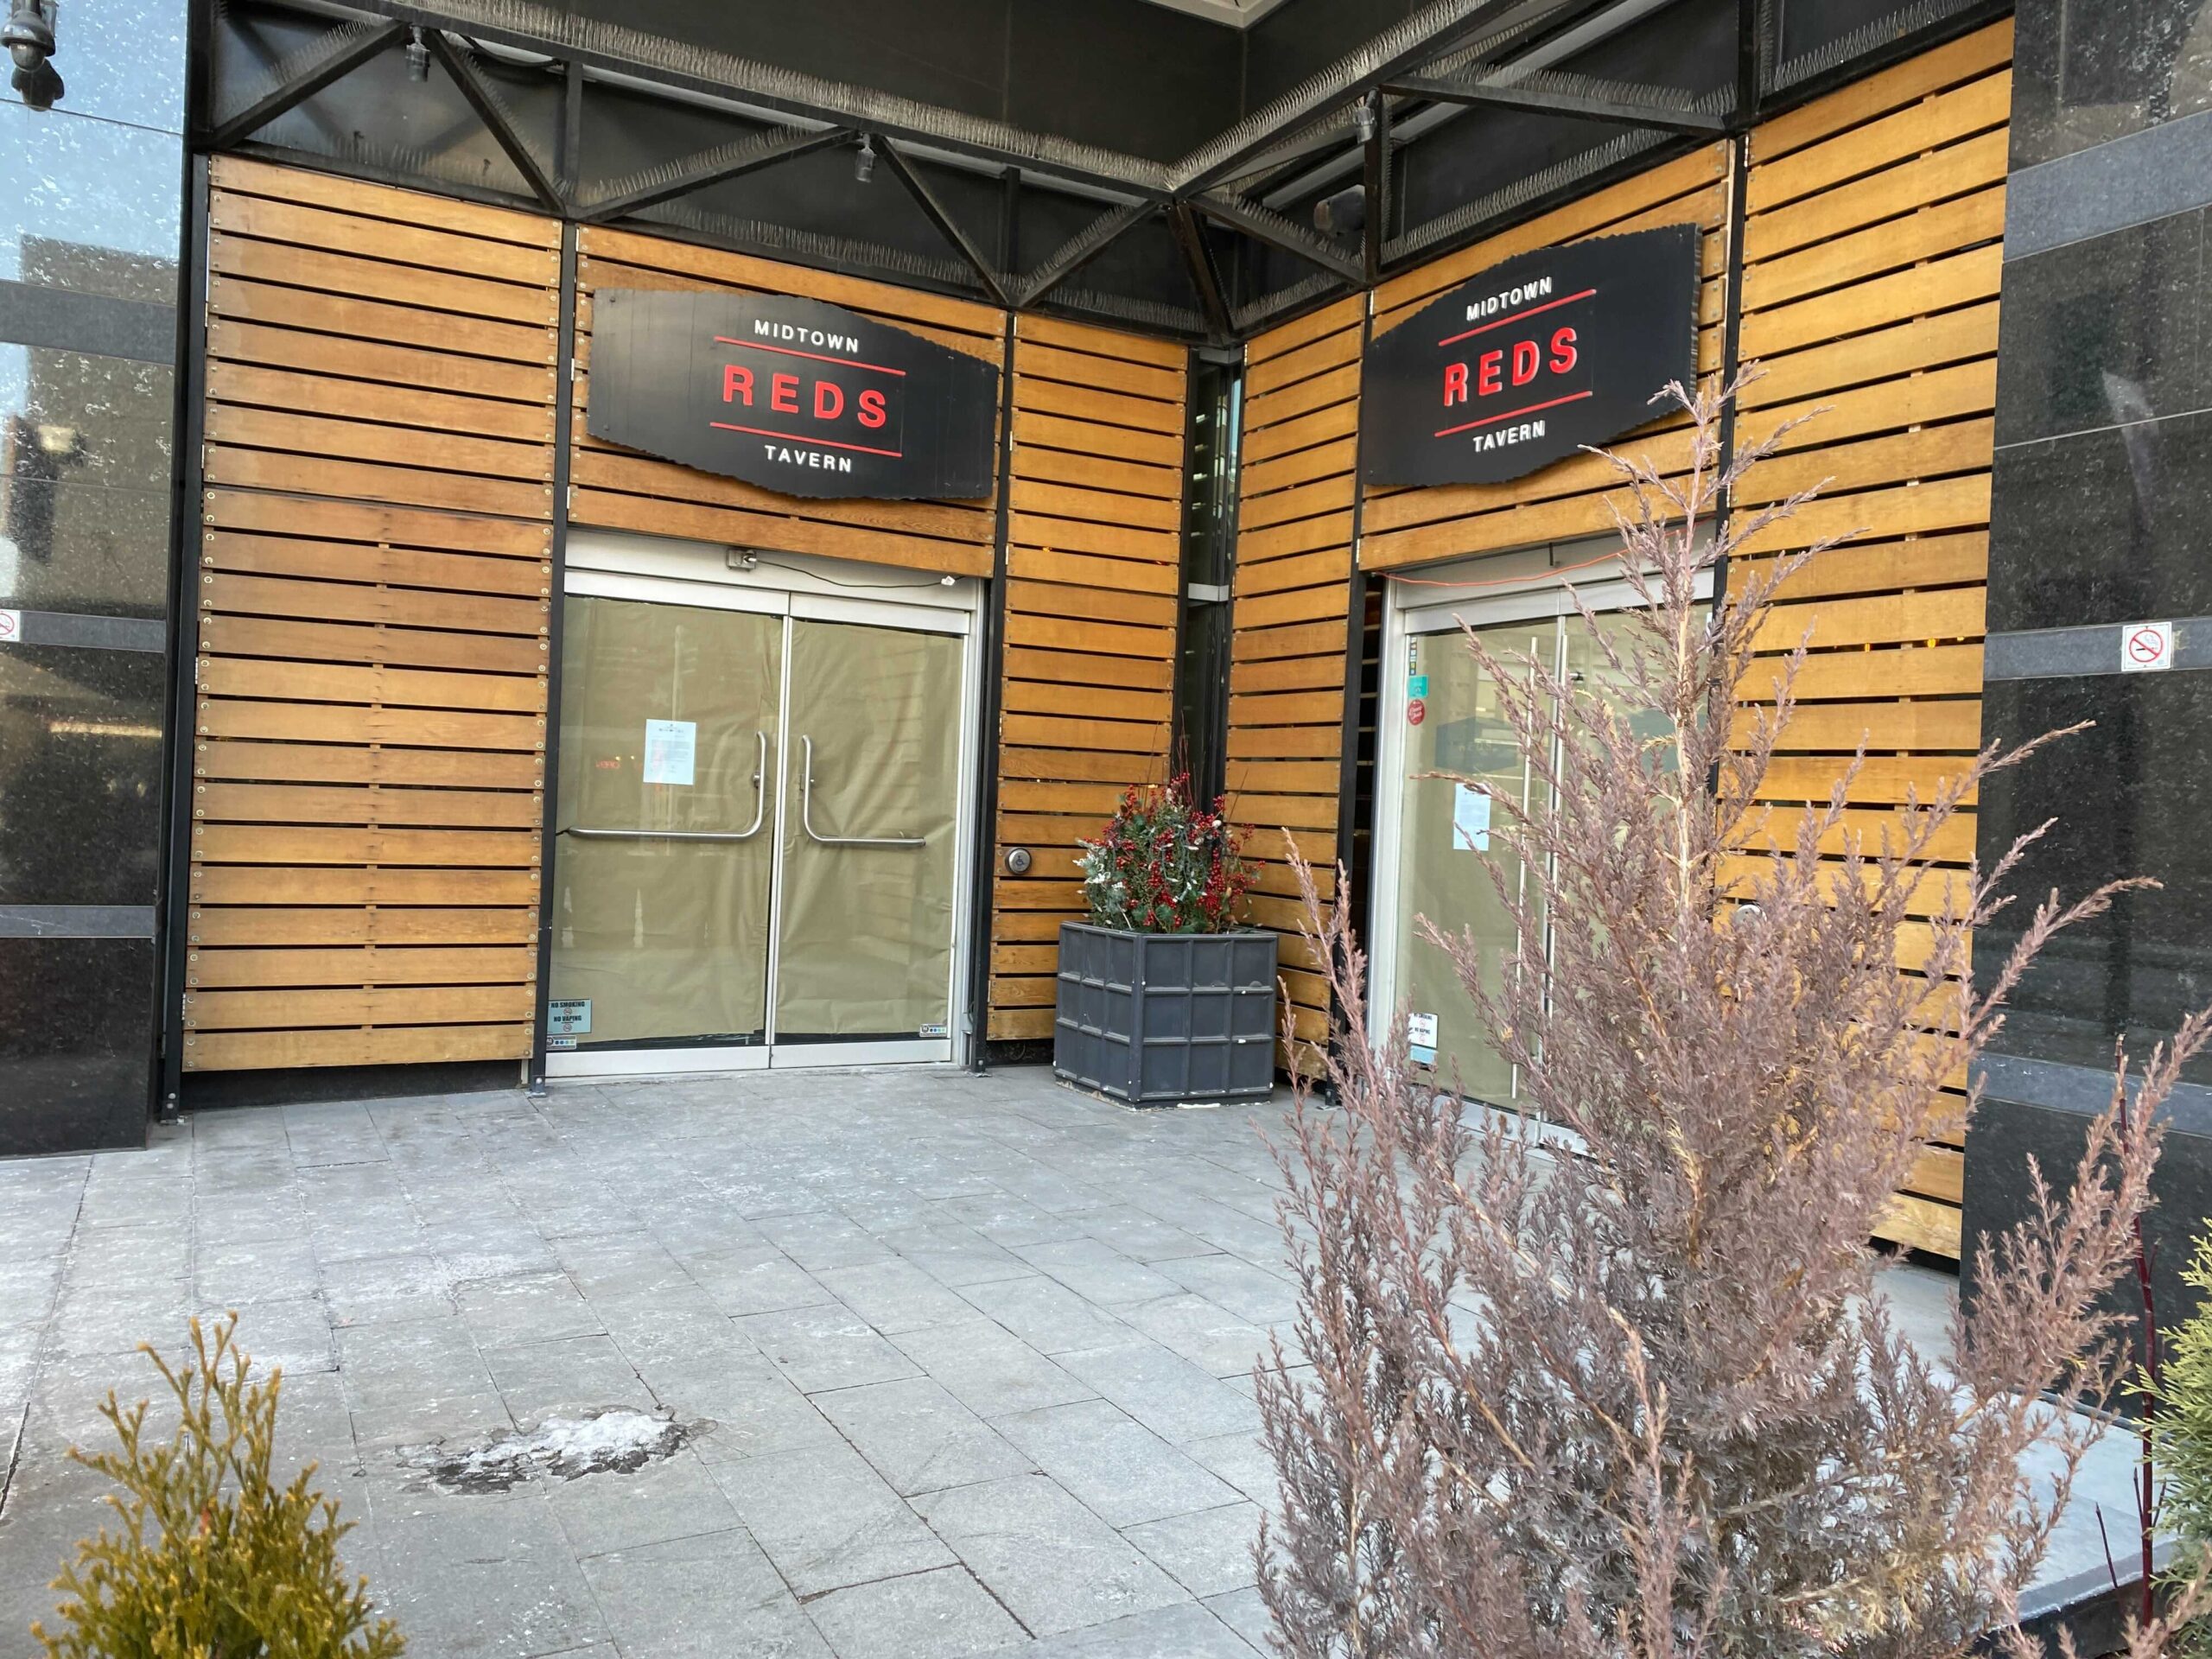 Exterior of Reds at Aura Centre which is closing. Photo: Dustin Fuhs